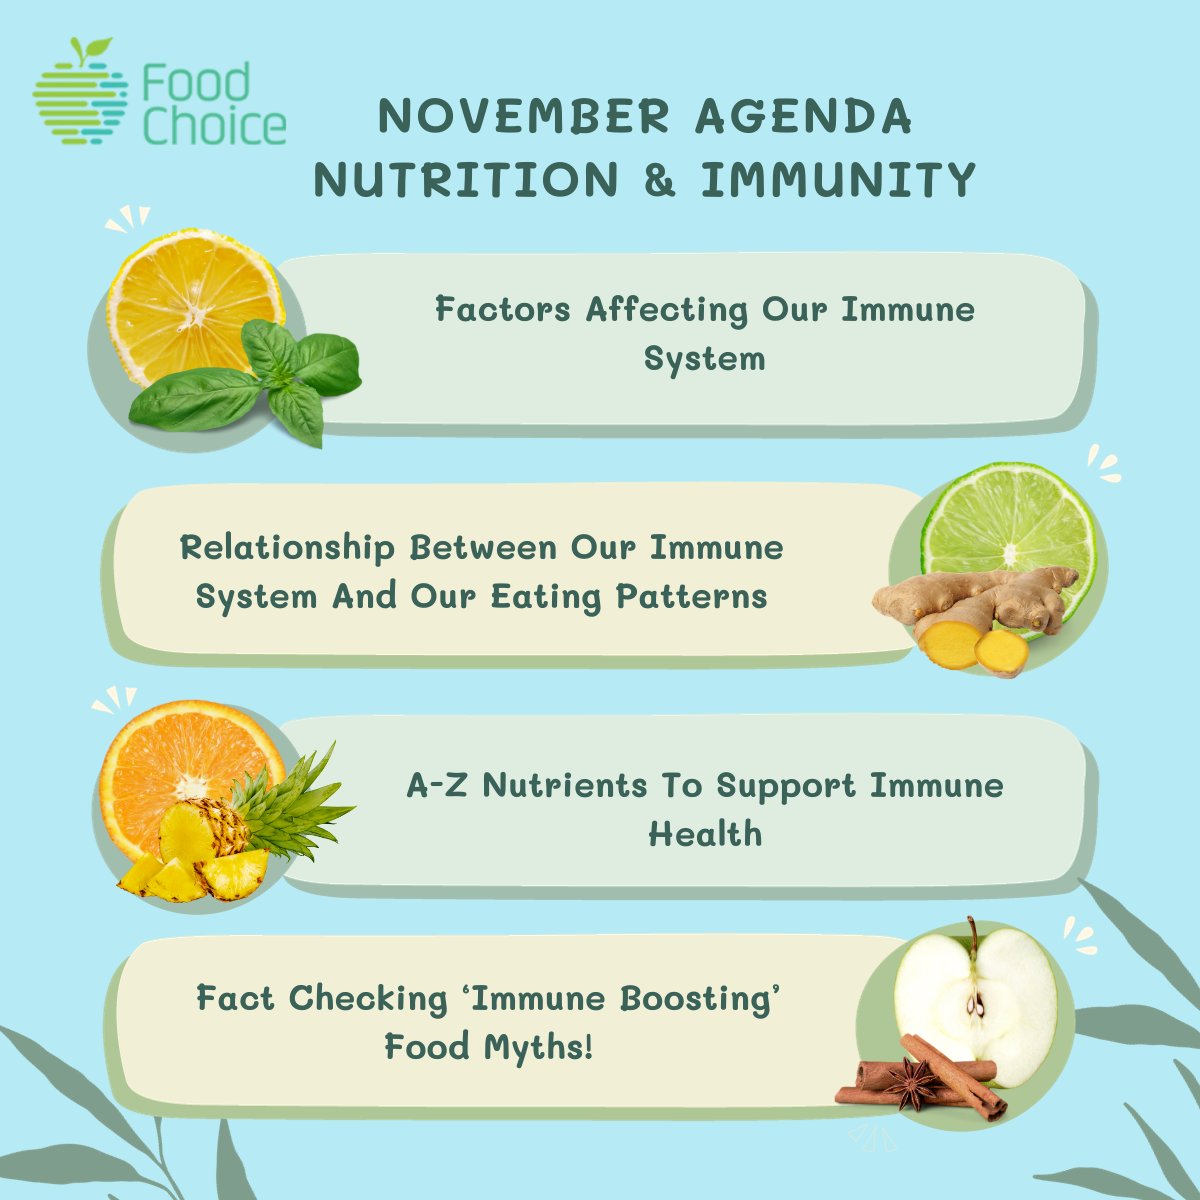 In line with the Government’s National Framework for Healthy Workplaces, we are delighted to share our 3-Month Nutrition Education Training Programme with Limerick City & County Council employees! It's all about Nutrition and Immunity this month! @Limerick_ie